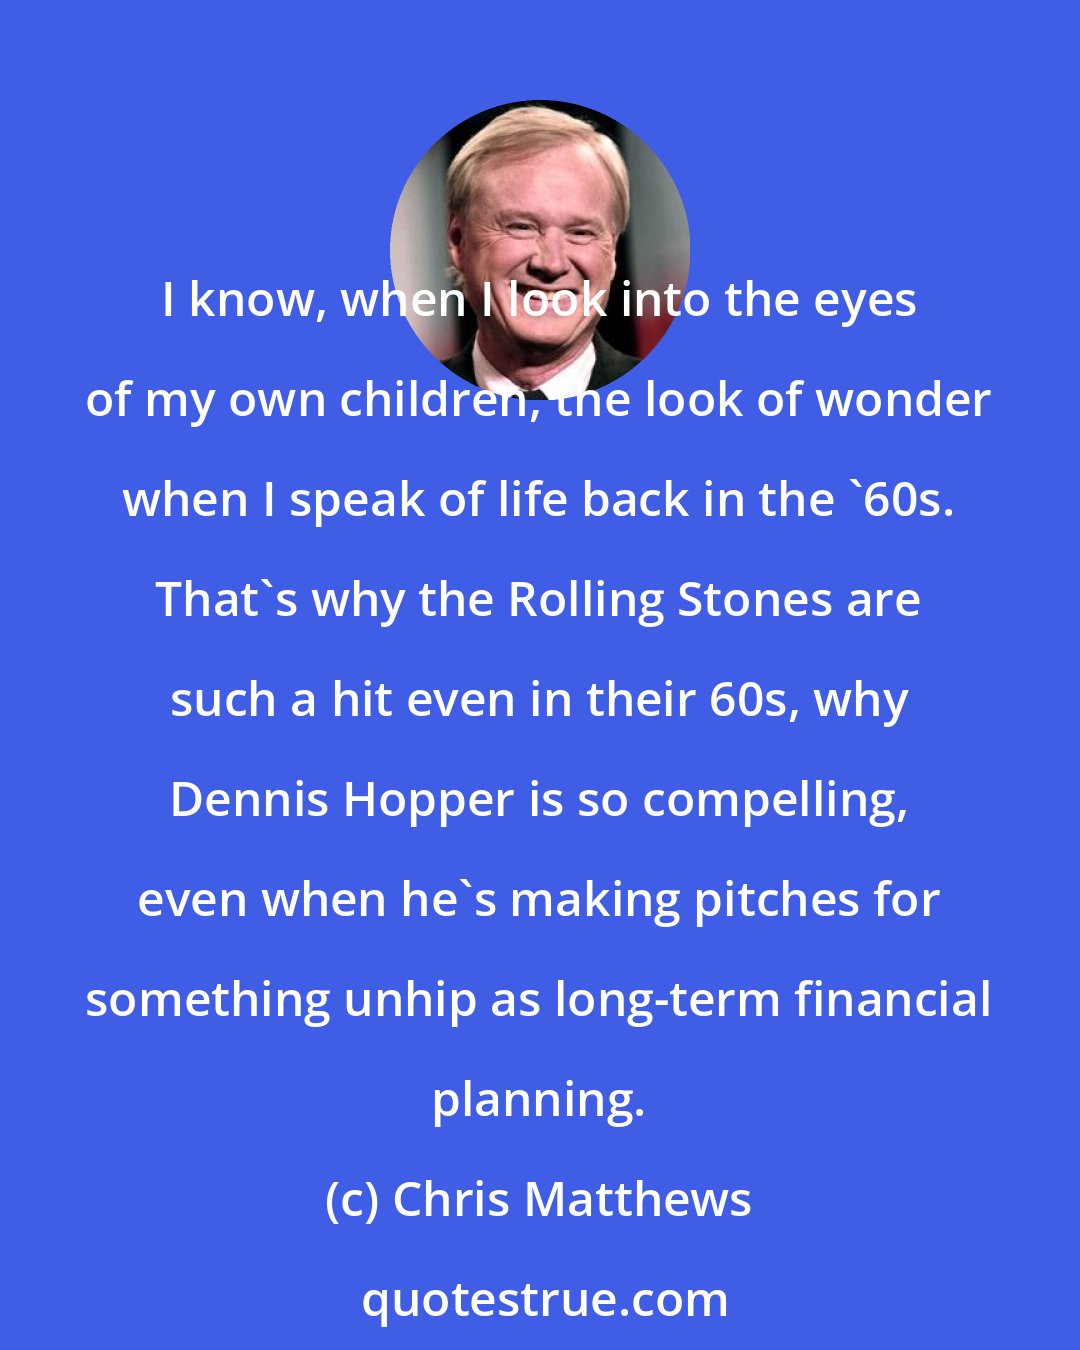 Chris Matthews: I know, when I look into the eyes of my own children, the look of wonder when I speak of life back in the '60s. That's why the Rolling Stones are such a hit even in their 60s, why Dennis Hopper is so compelling, even when he's making pitches for something unhip as long-term financial planning.